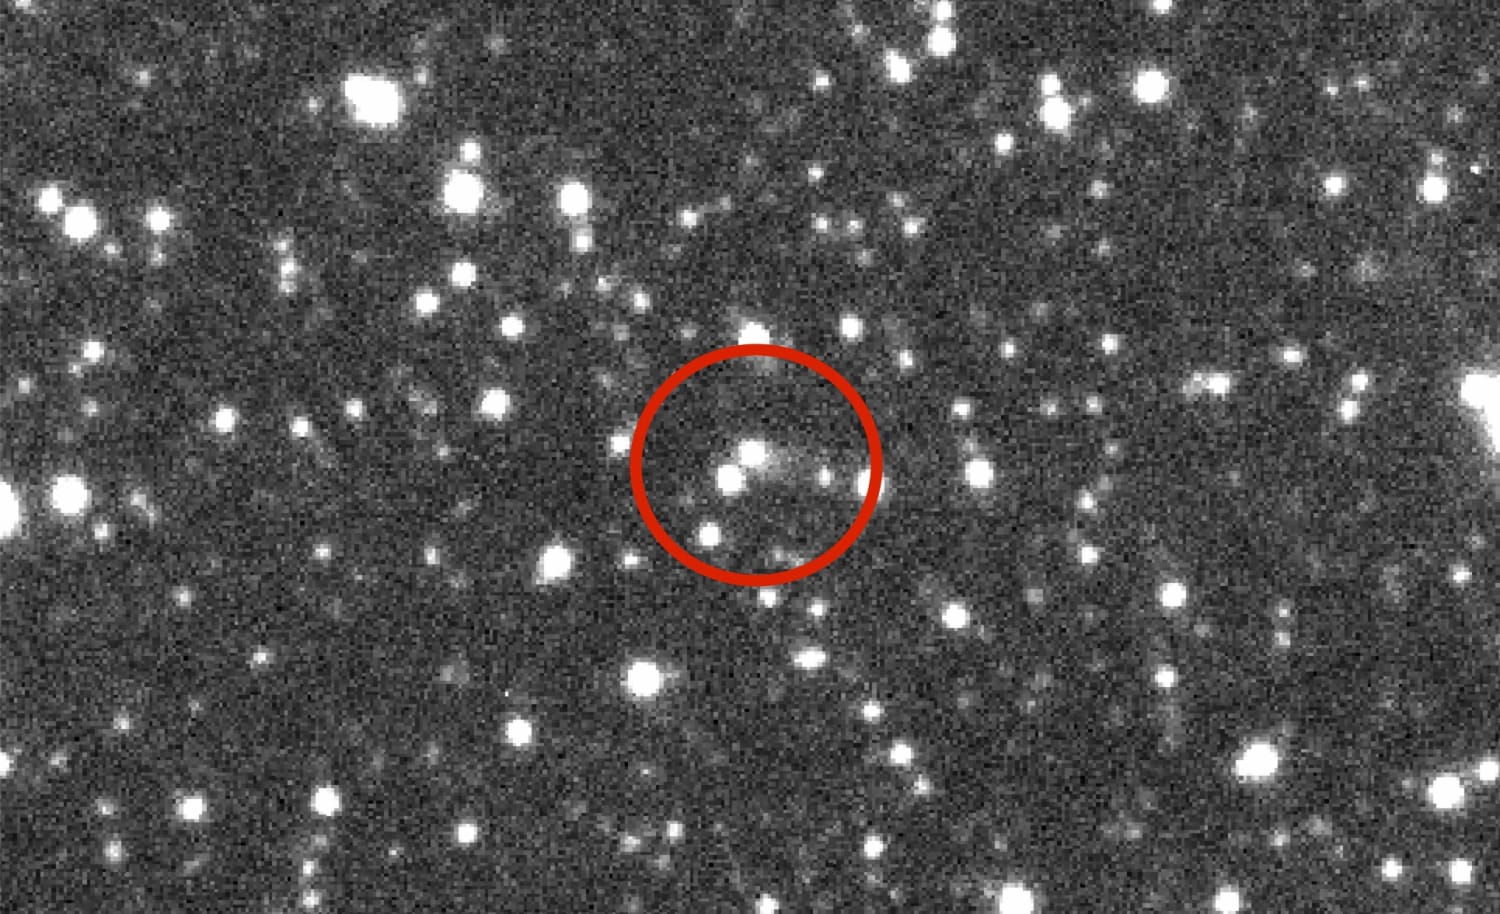 UH ATLAS telescope discovers first-of-its-kind asteroid